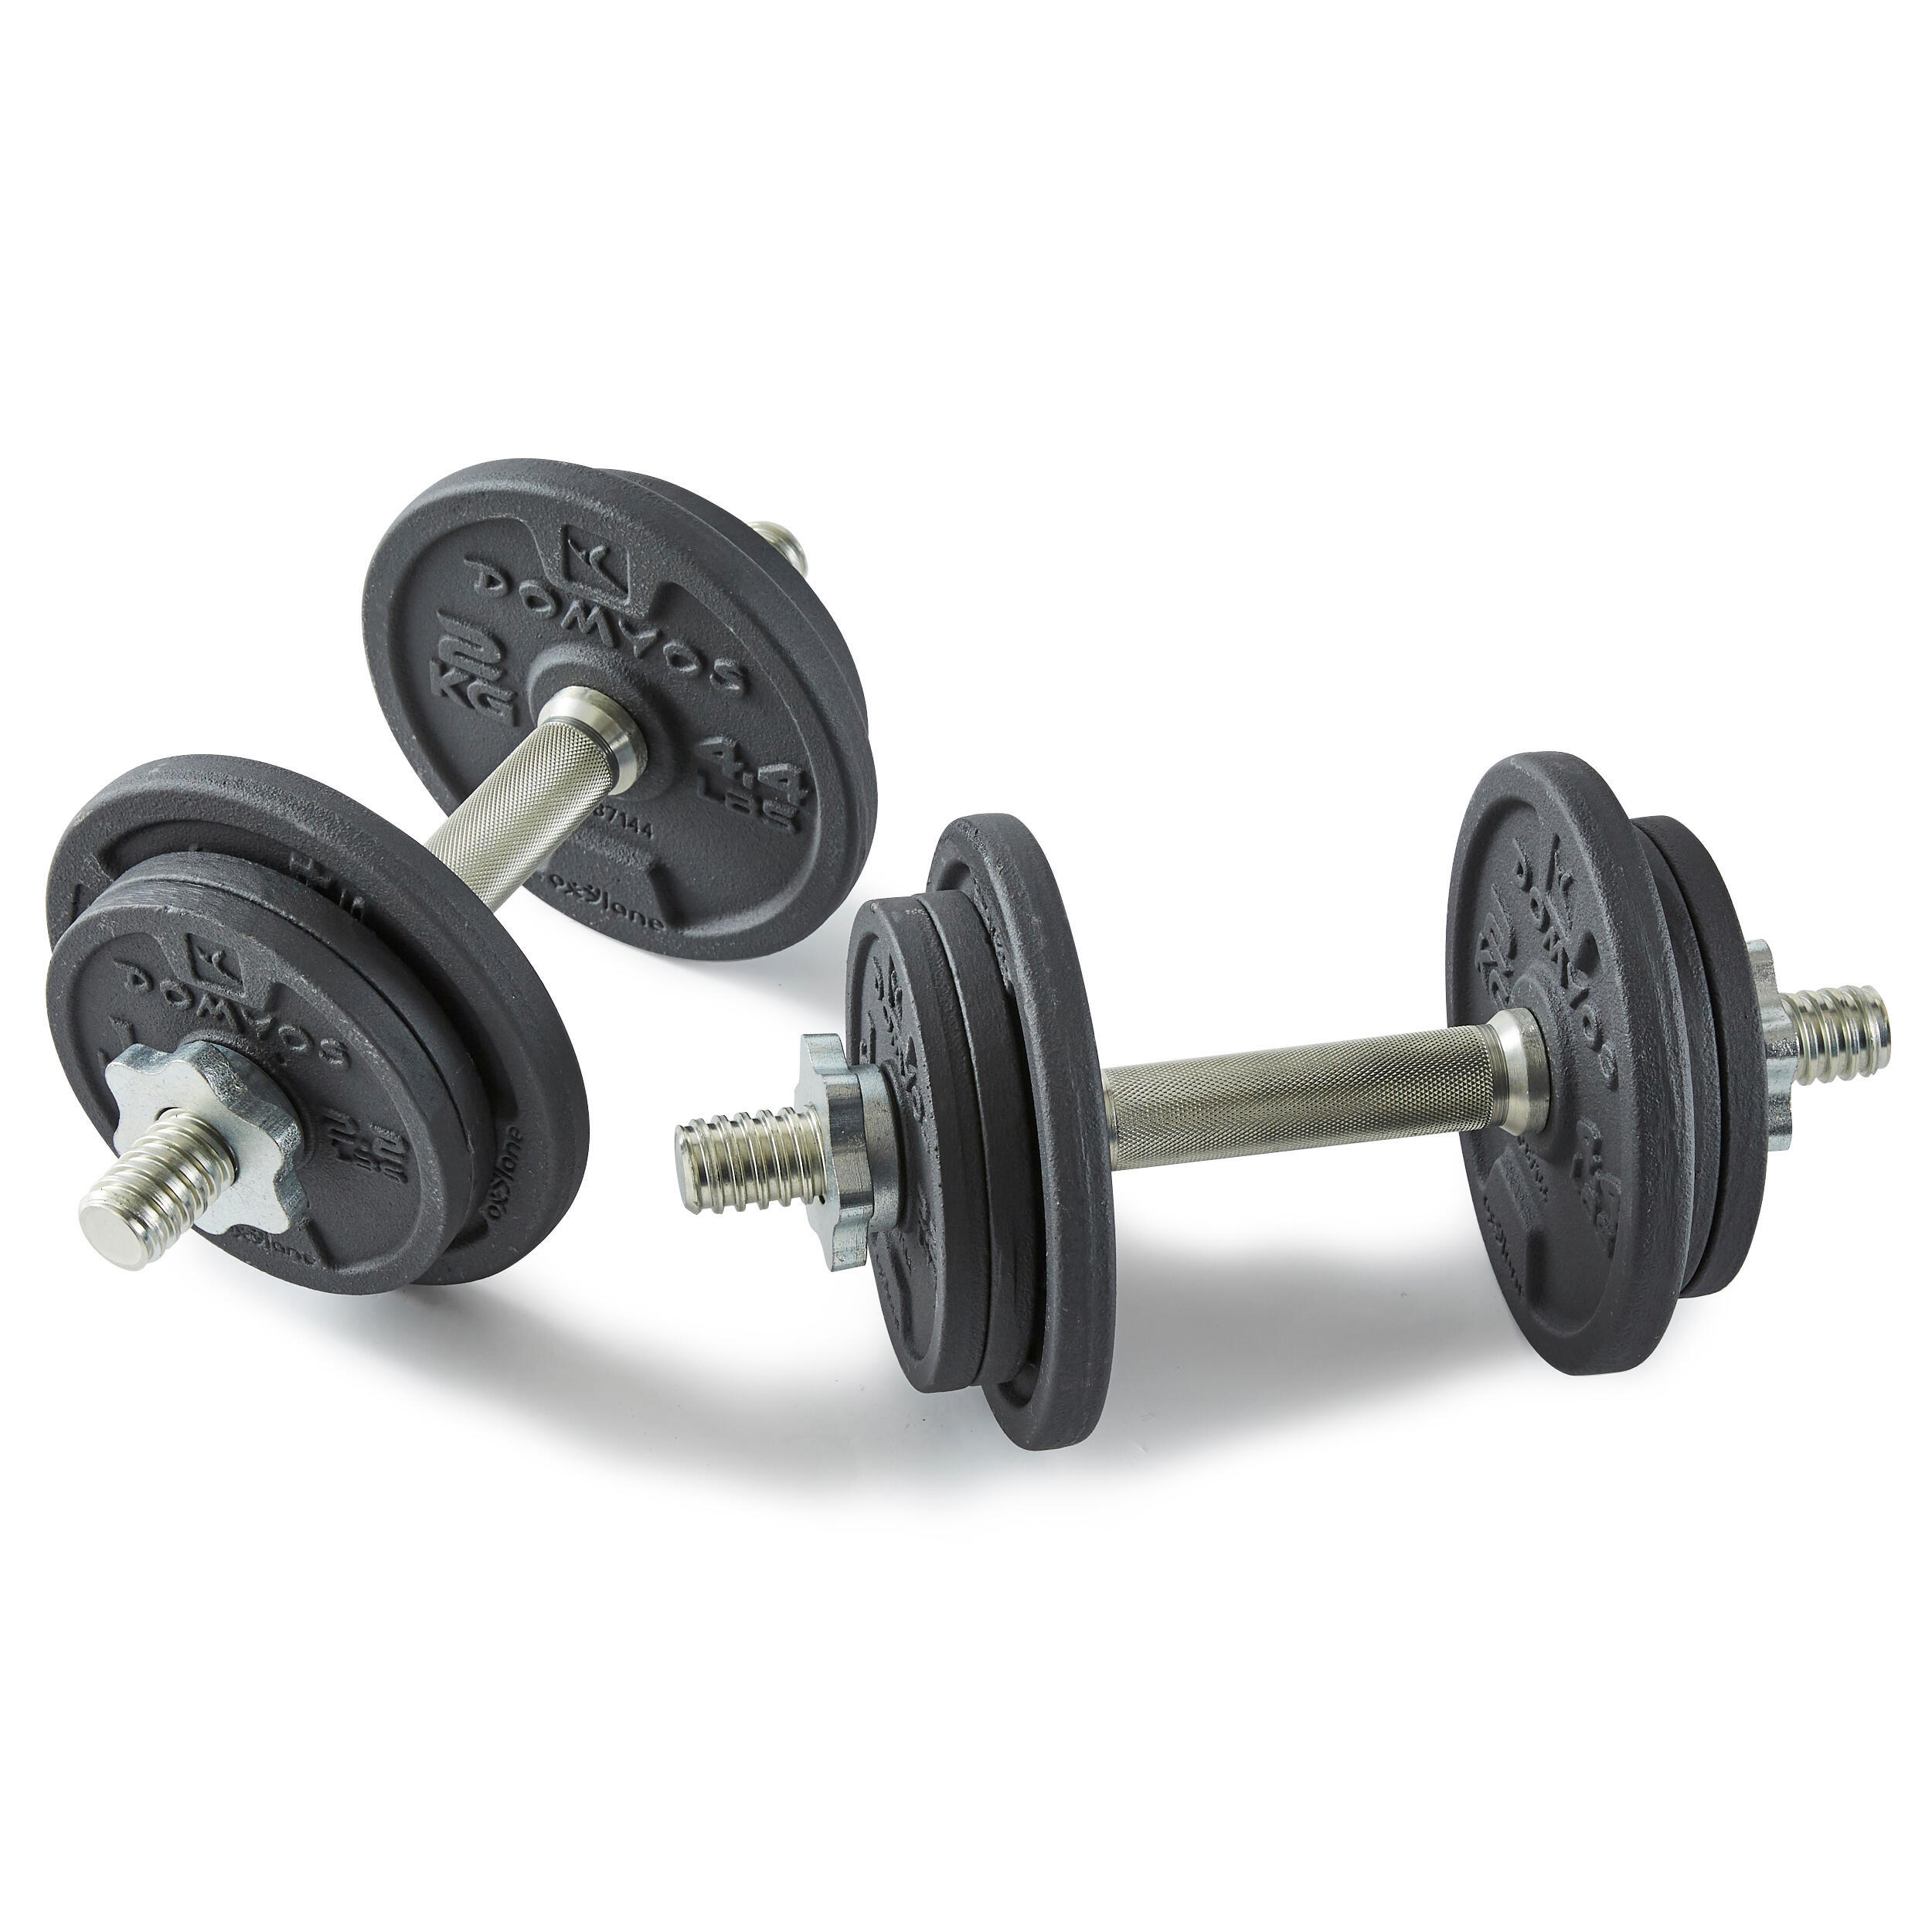 Compact and durable cast iron weight training dumbbell set, 20 kg 4/14